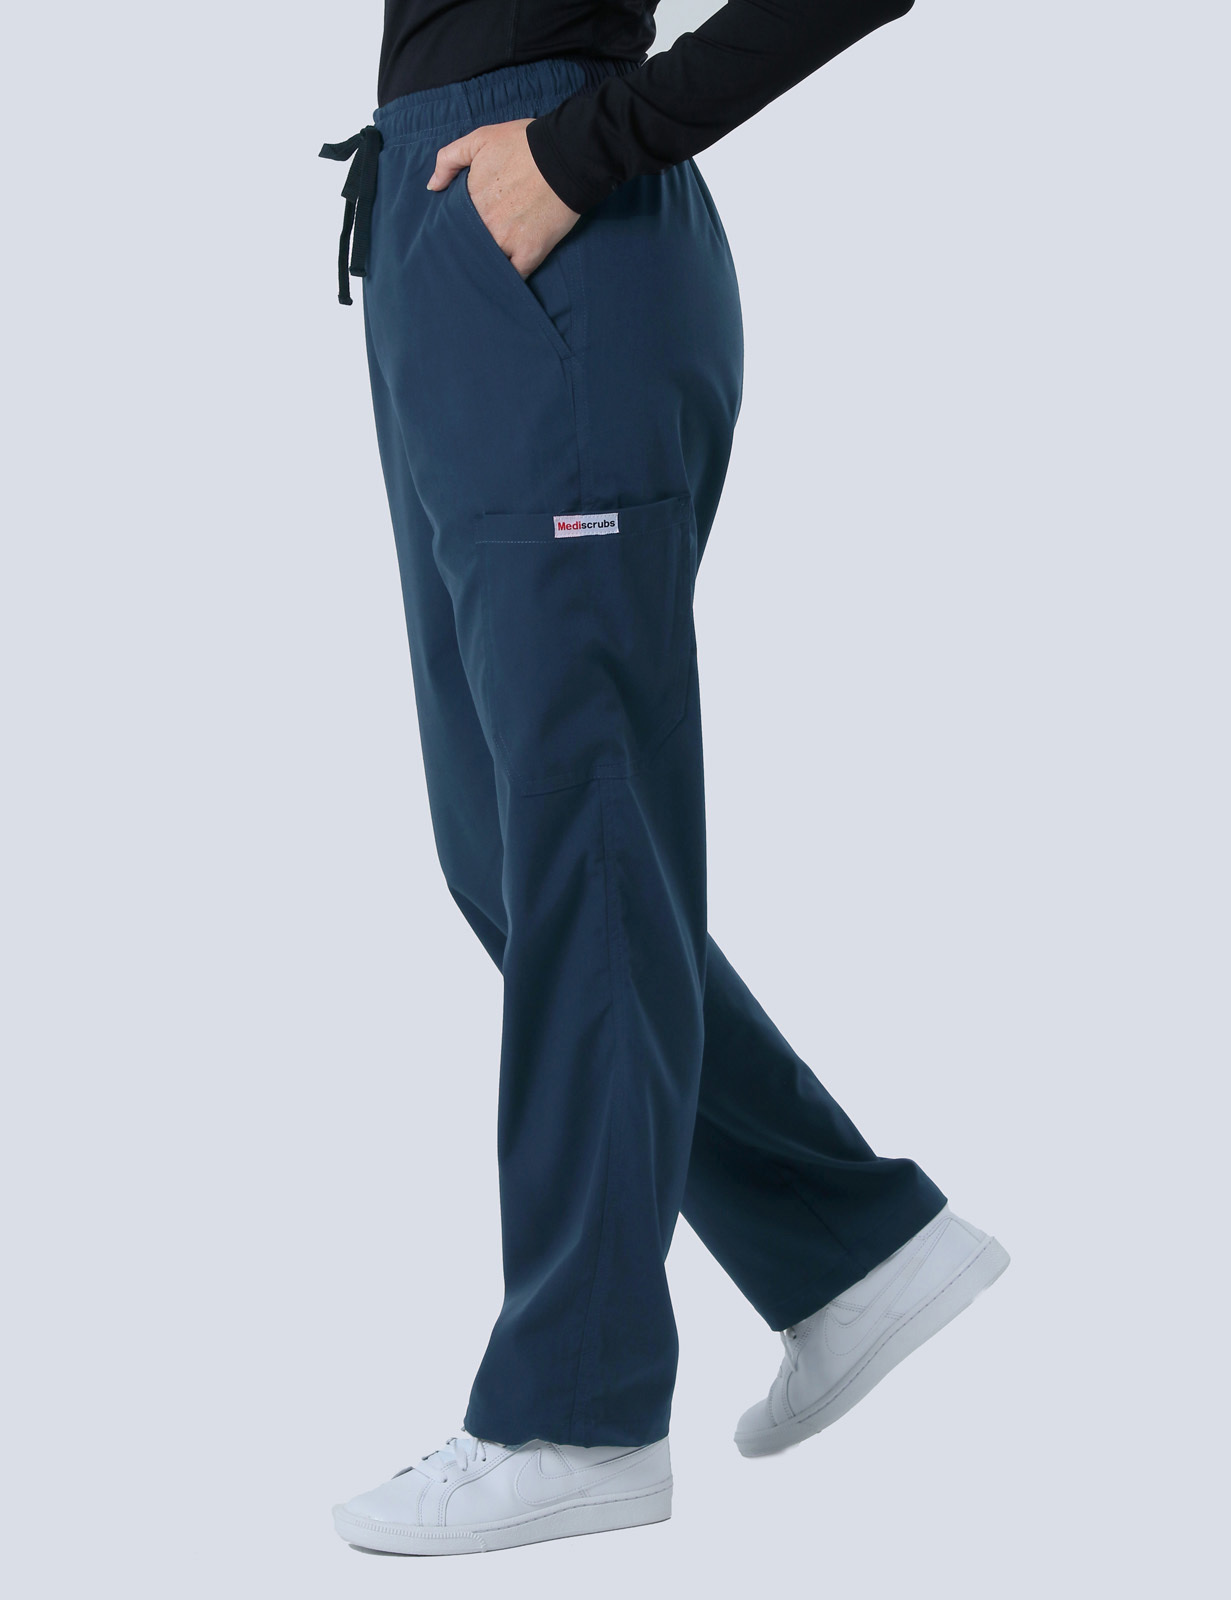 Peninsula Health - ED Emergency Nurse (Women's Fit Solid and Cargo Pants in Navy incl Logos)